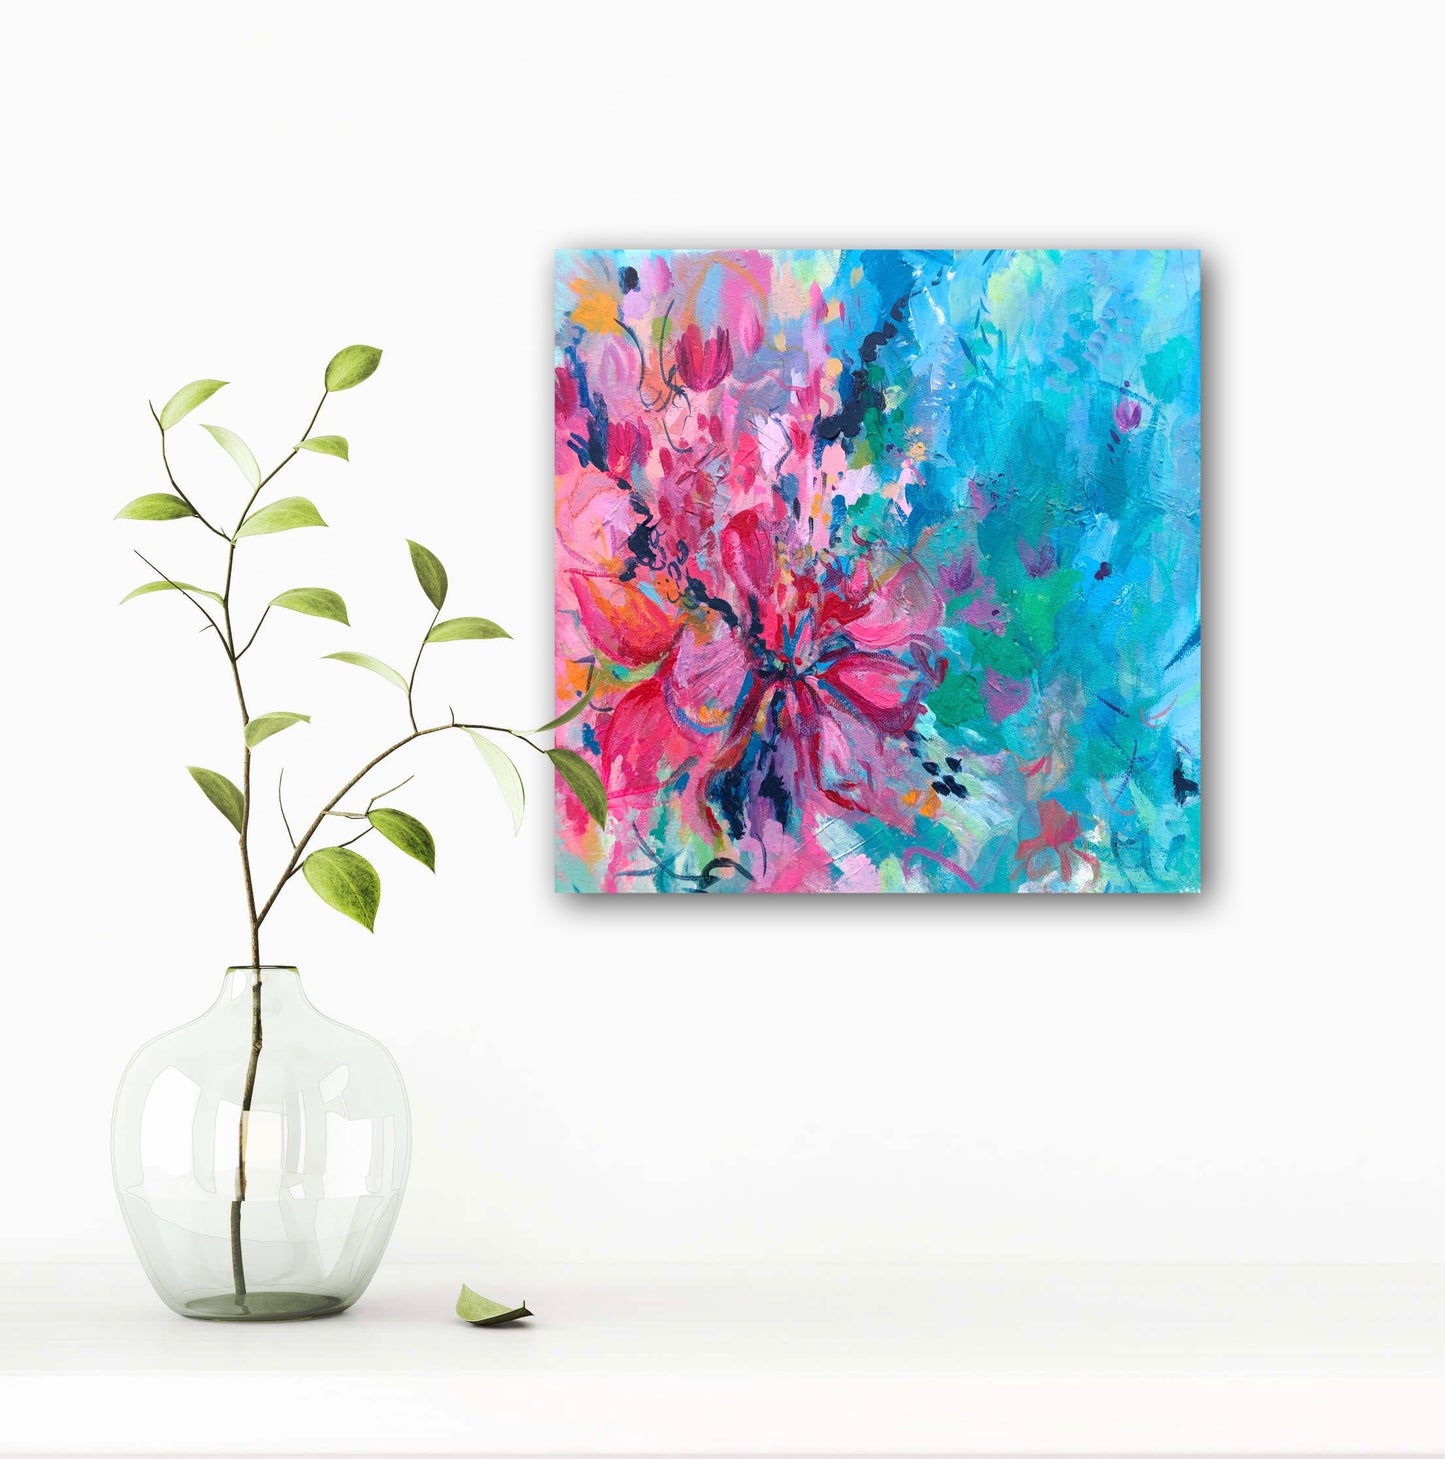 Square painting featuring clusters of colourful and vibrant  pink flowers against a blue, green and turquoise background.